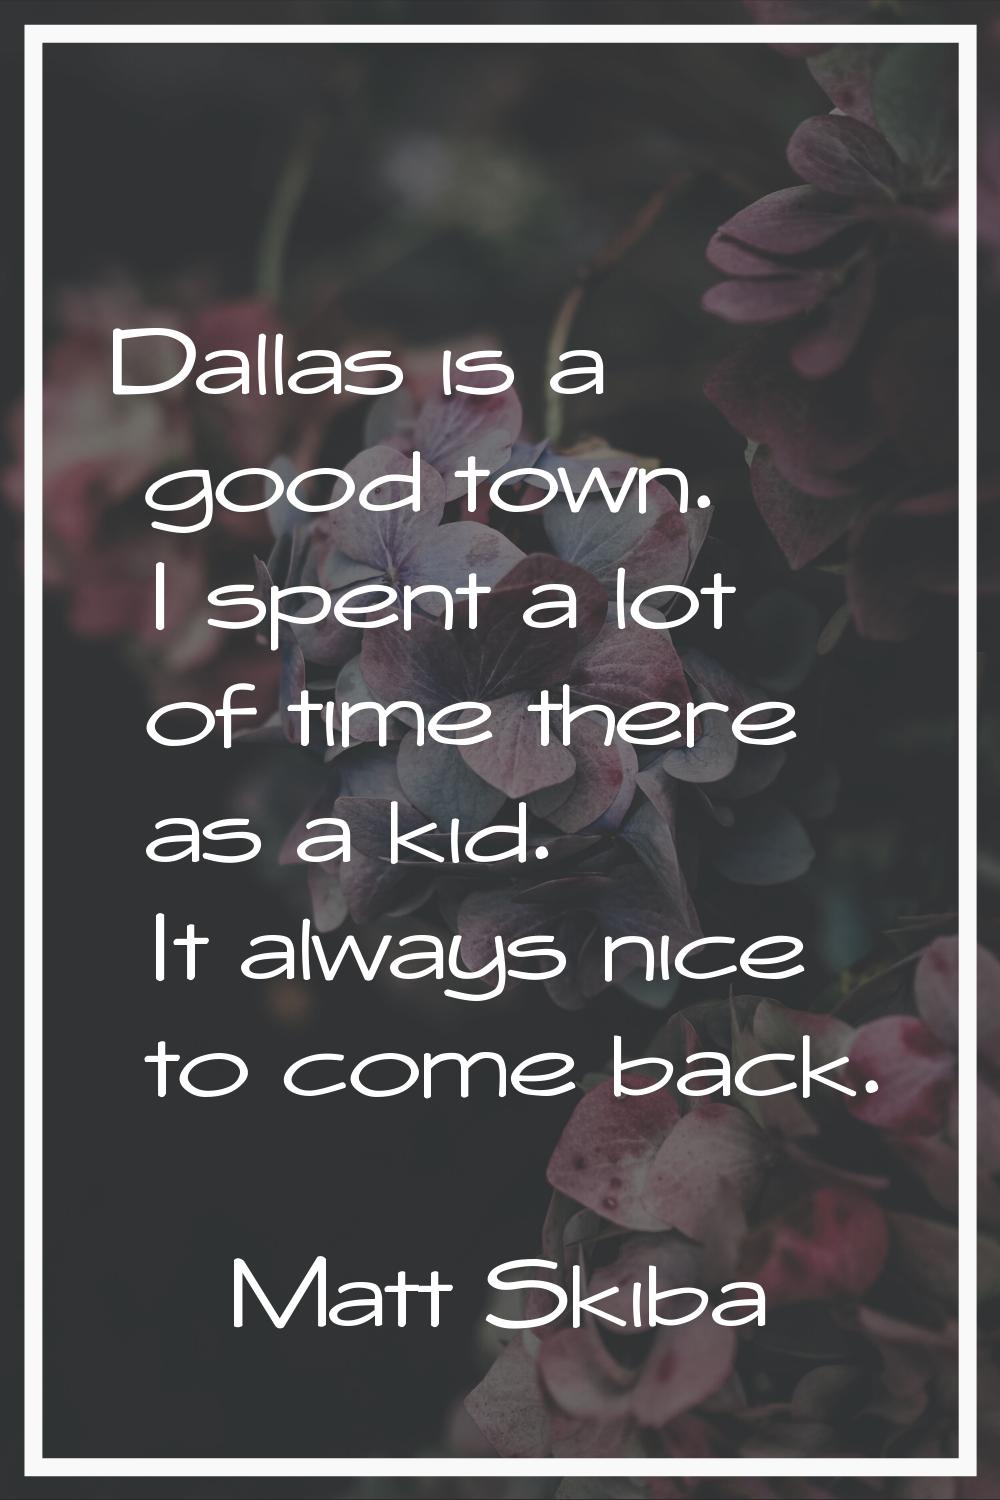 Dallas is a good town. I spent a lot of time there as a kid. It always nice to come back.